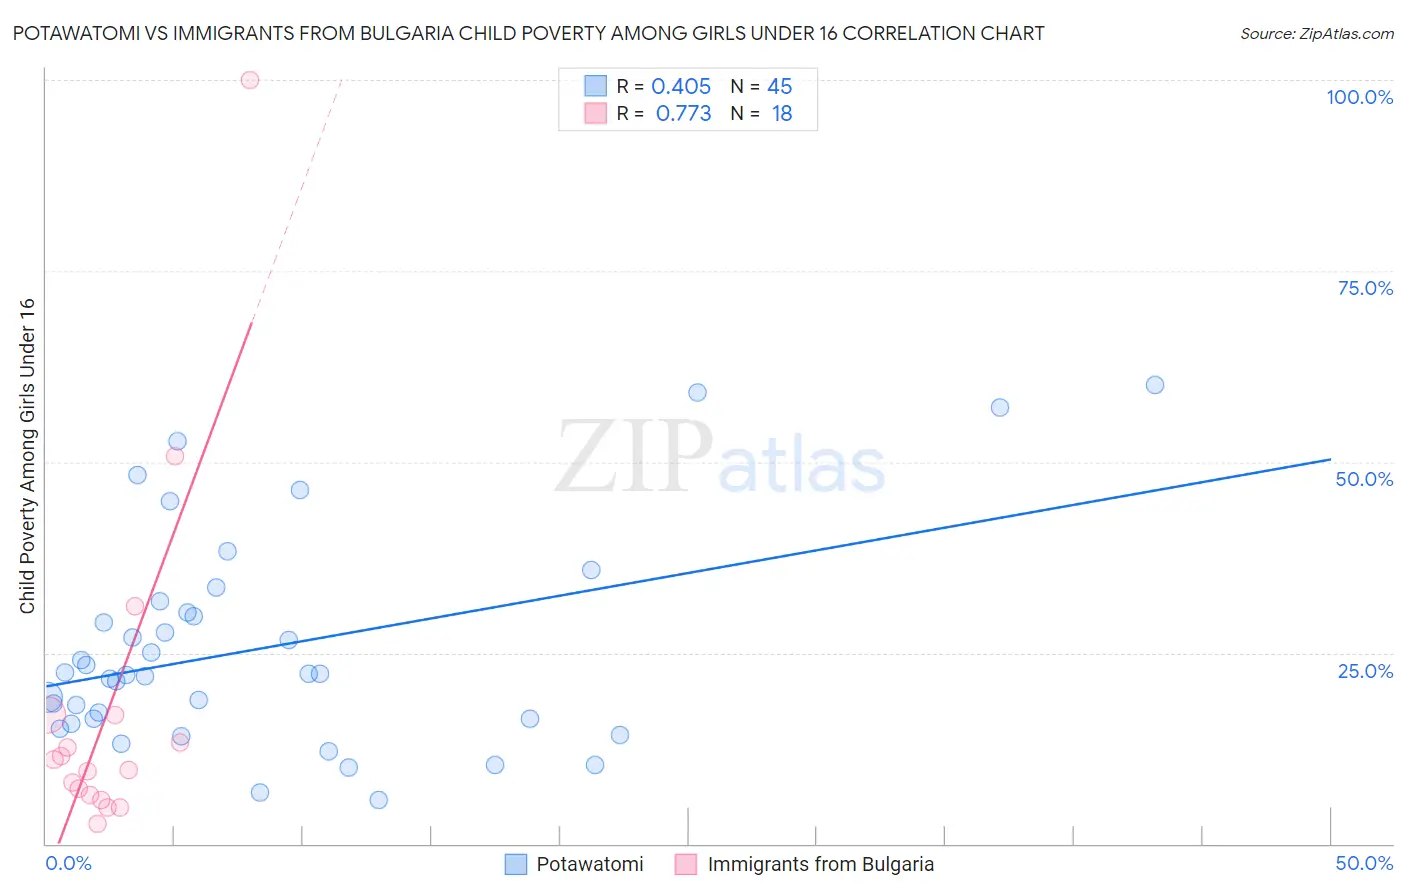 Potawatomi vs Immigrants from Bulgaria Child Poverty Among Girls Under 16